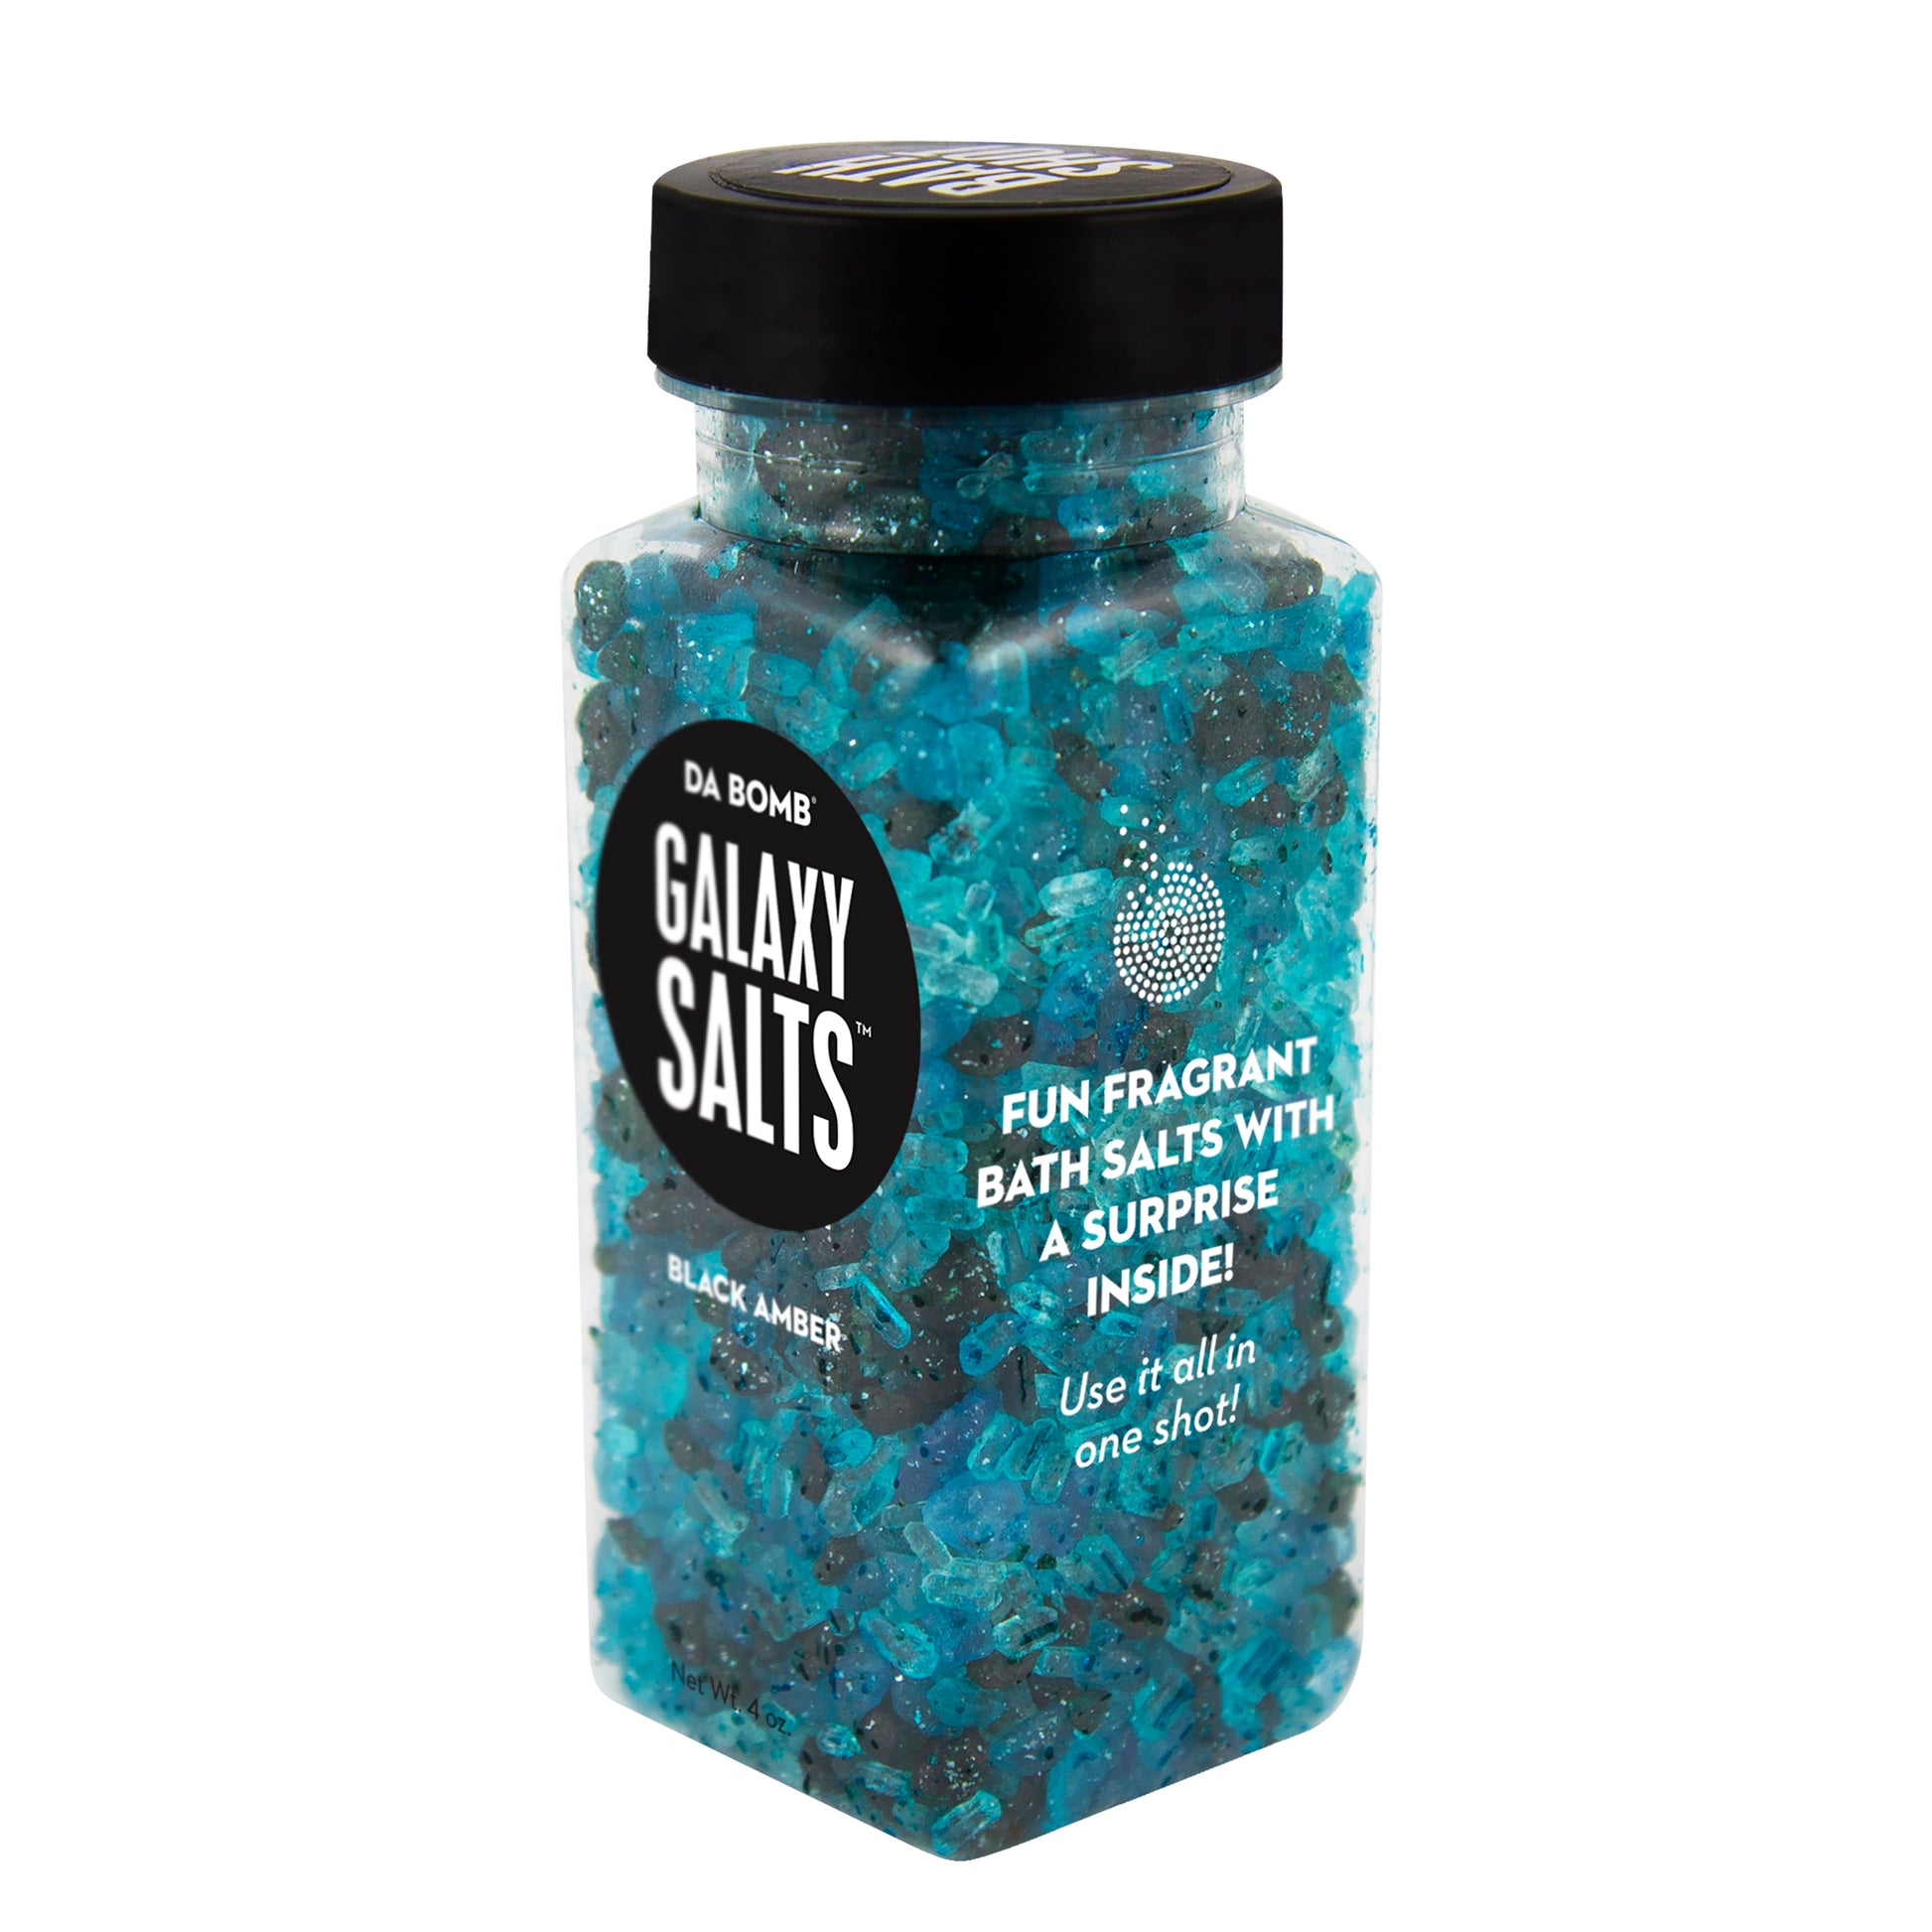 Small, clear plastic jar filled with black, blue and purple bath salt that smells like black amber. Each shot contains a fun surprise.